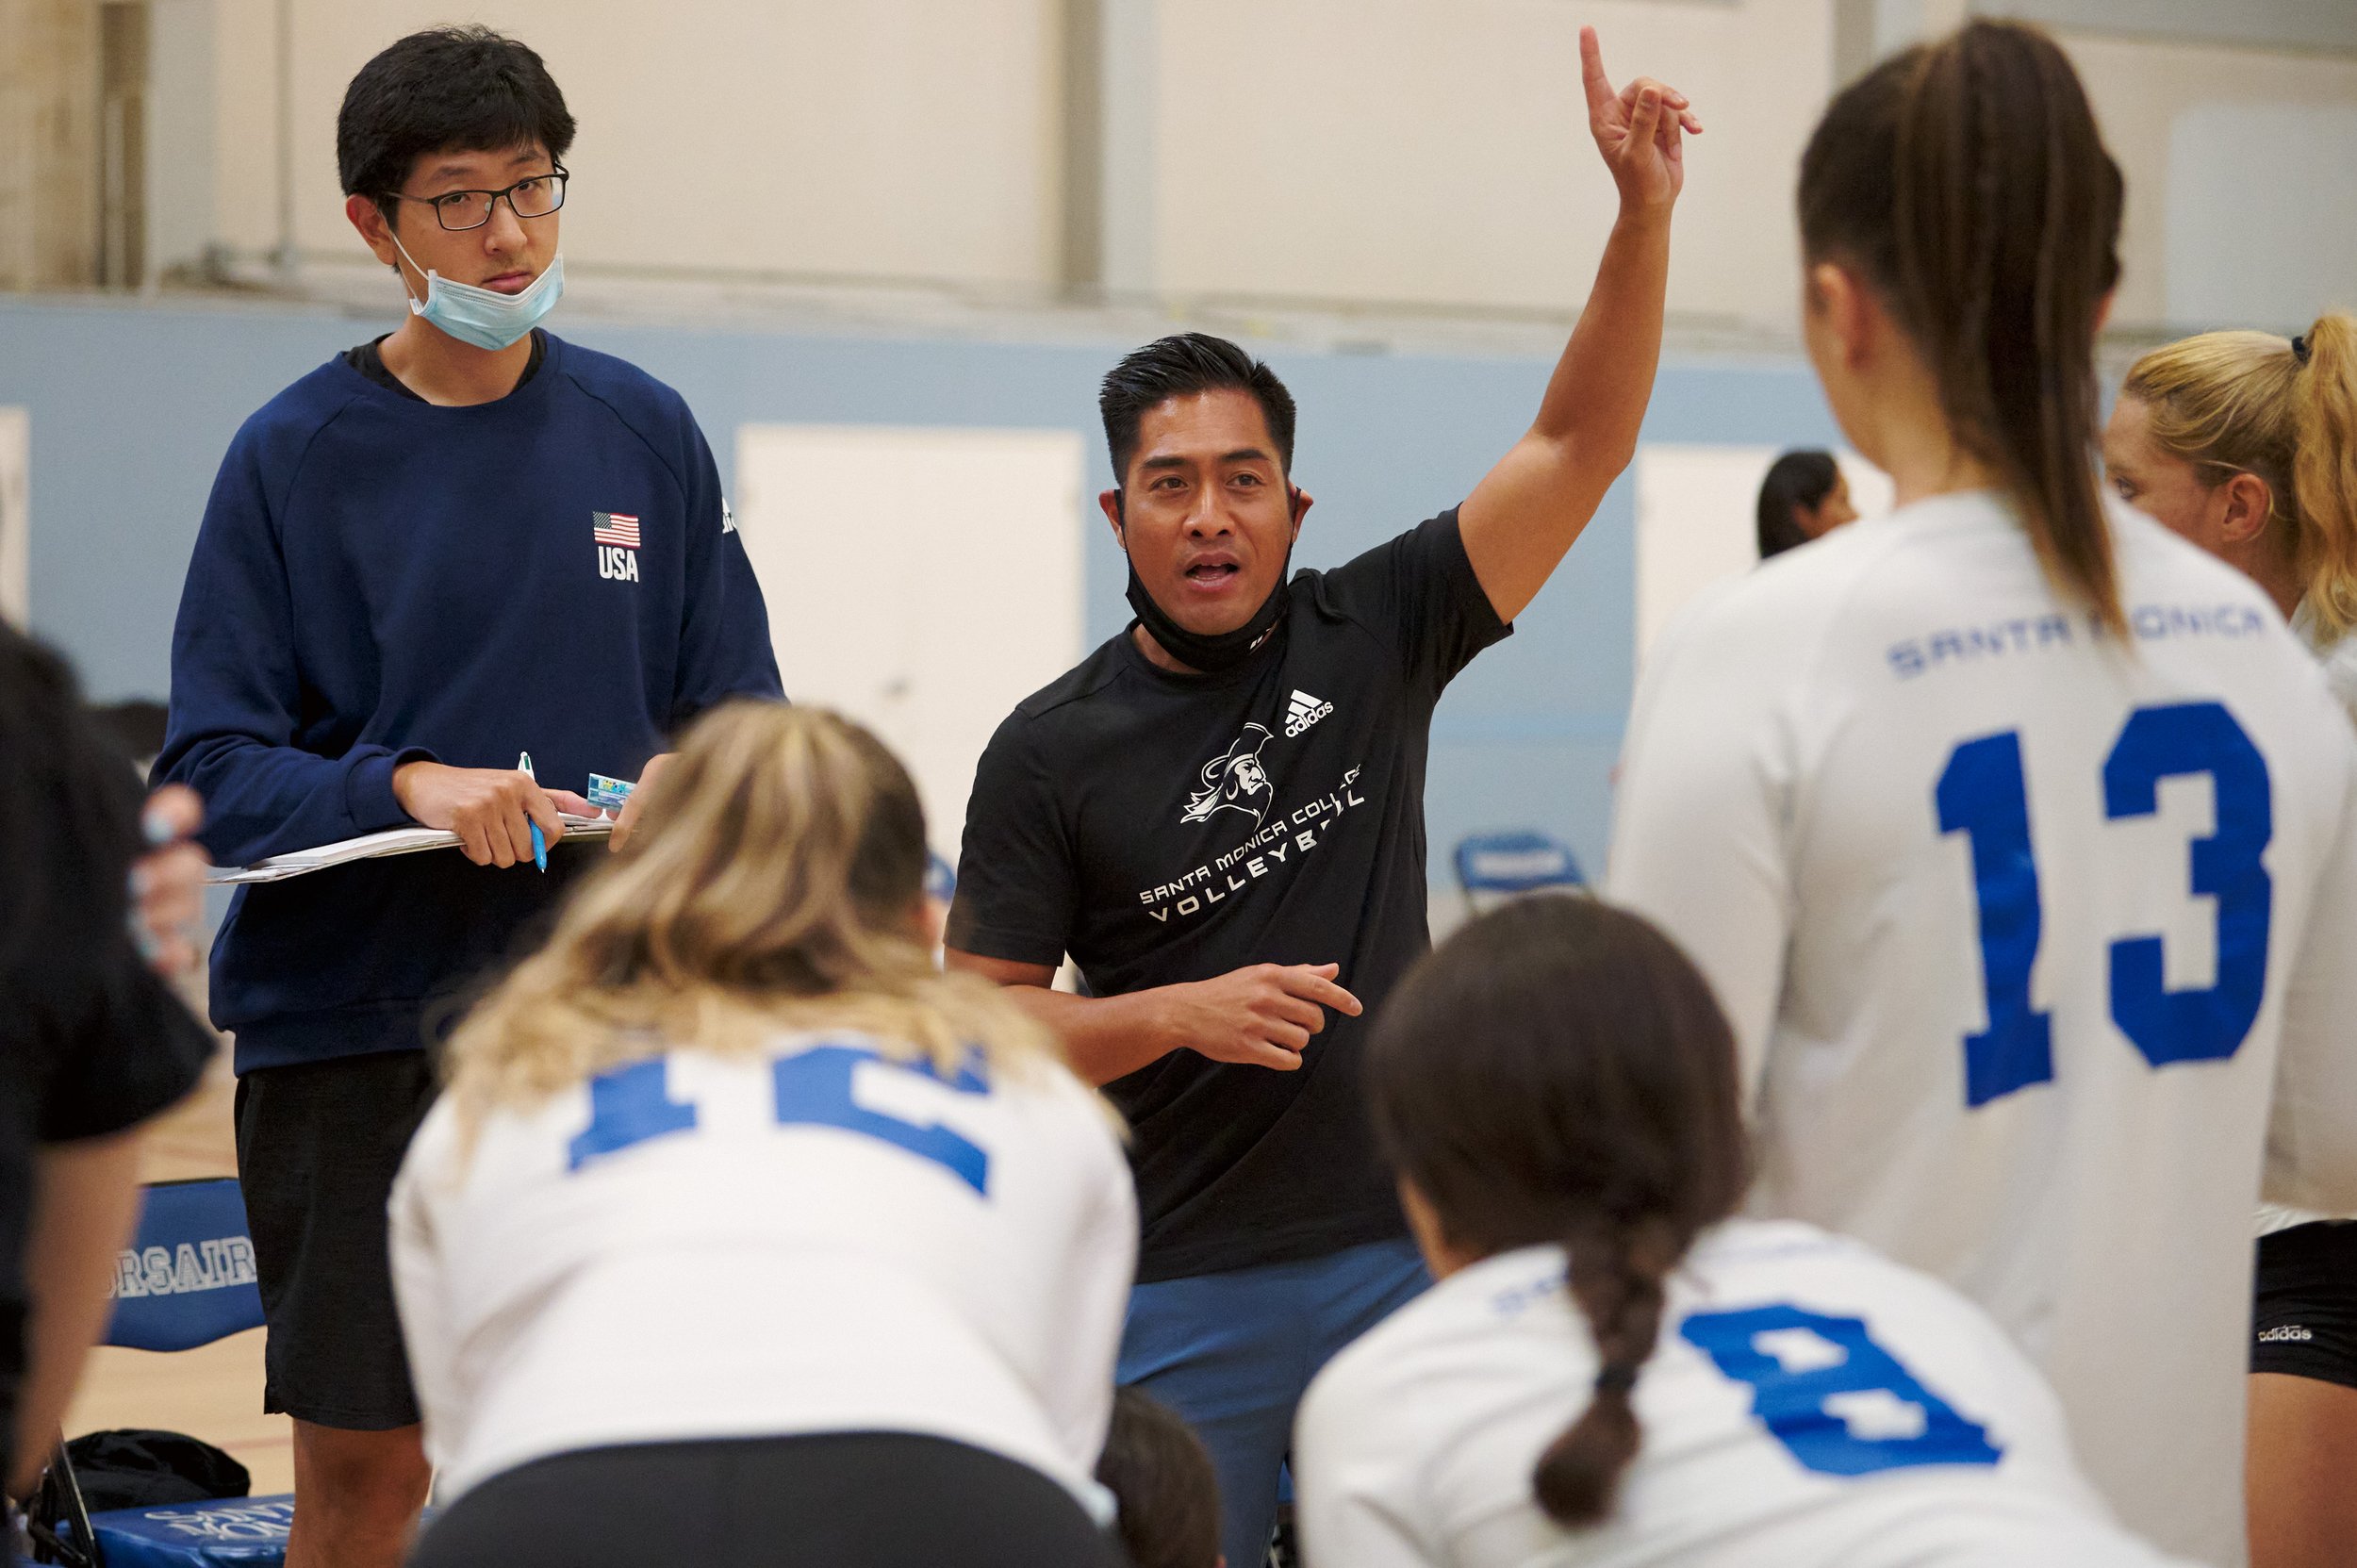  Santa Monica College Corsairs' Women's Volleyball Head Coach Christian Cammayo (right) and Assistant Coach Paddy Pan (left) during the match against the College of the Desert Roadrunners on Friday, October 7, 2022, at the Corsair Gym in Santa Monica